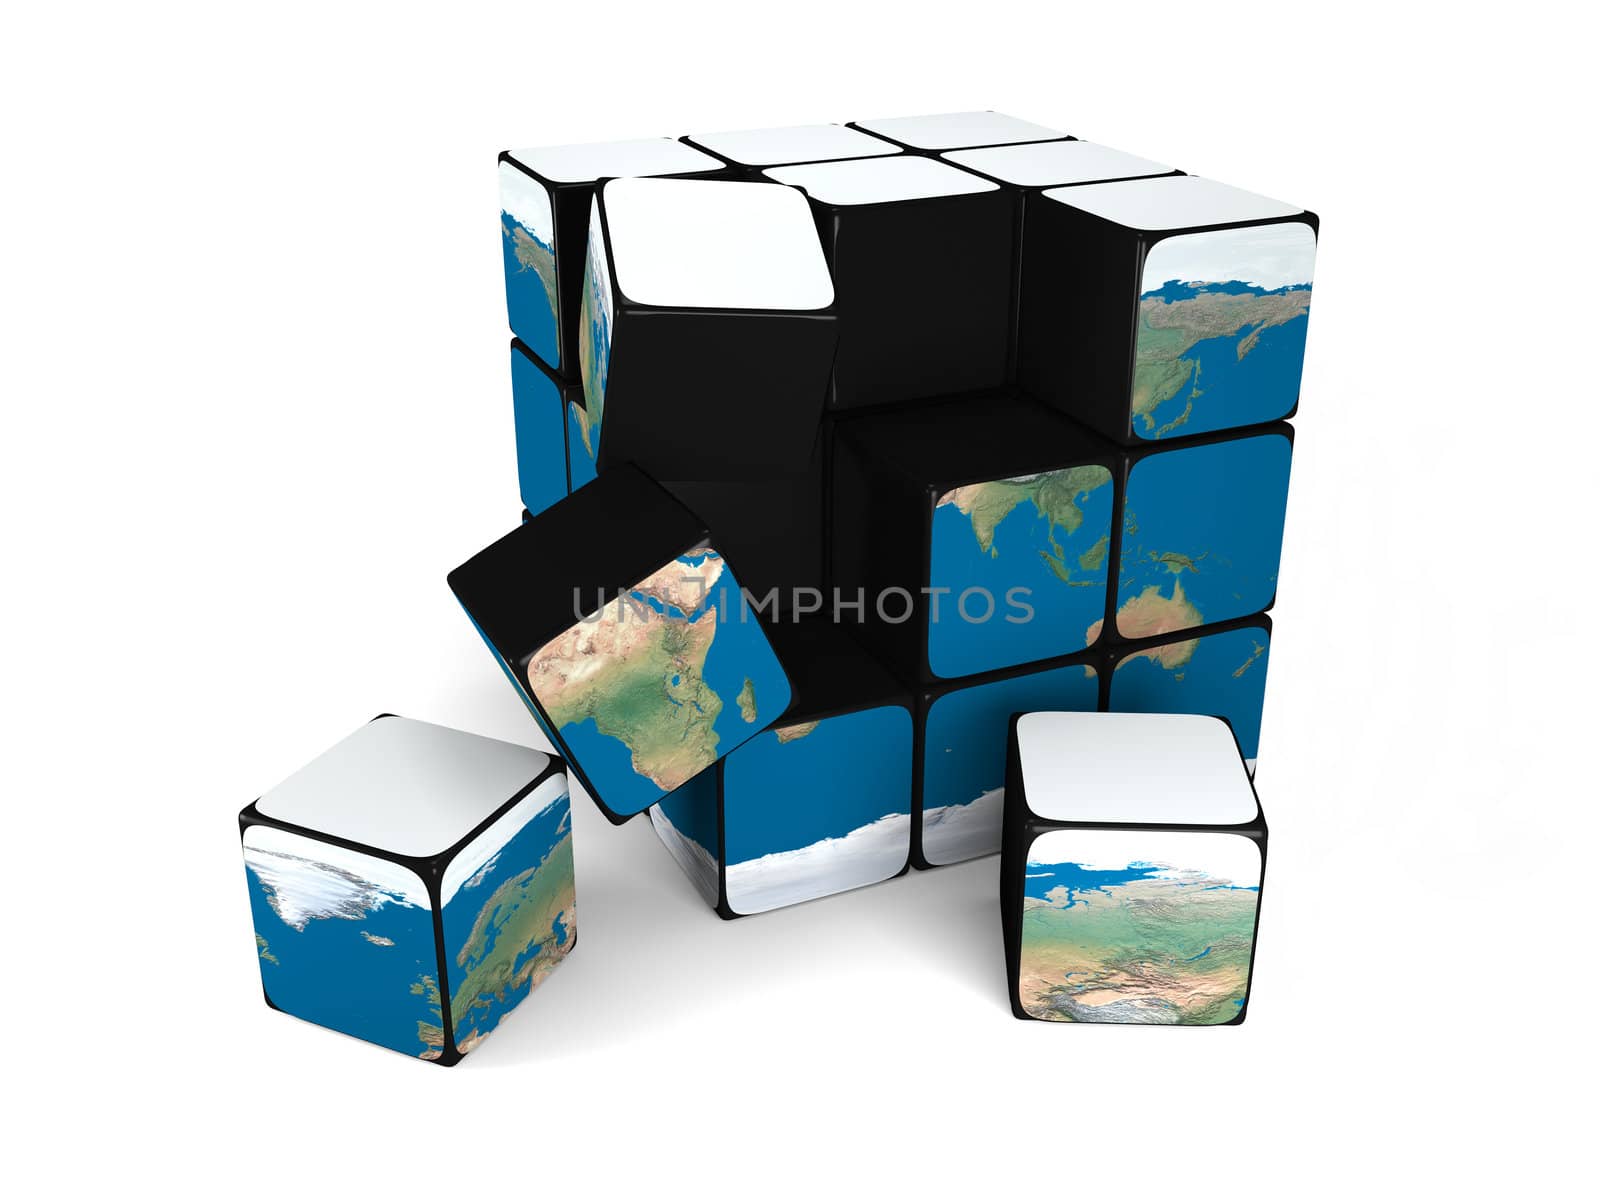 Cube representing planet Earth in decay with several building blocks falling down, isolated on white background. Elements of this image furnished by NASA.